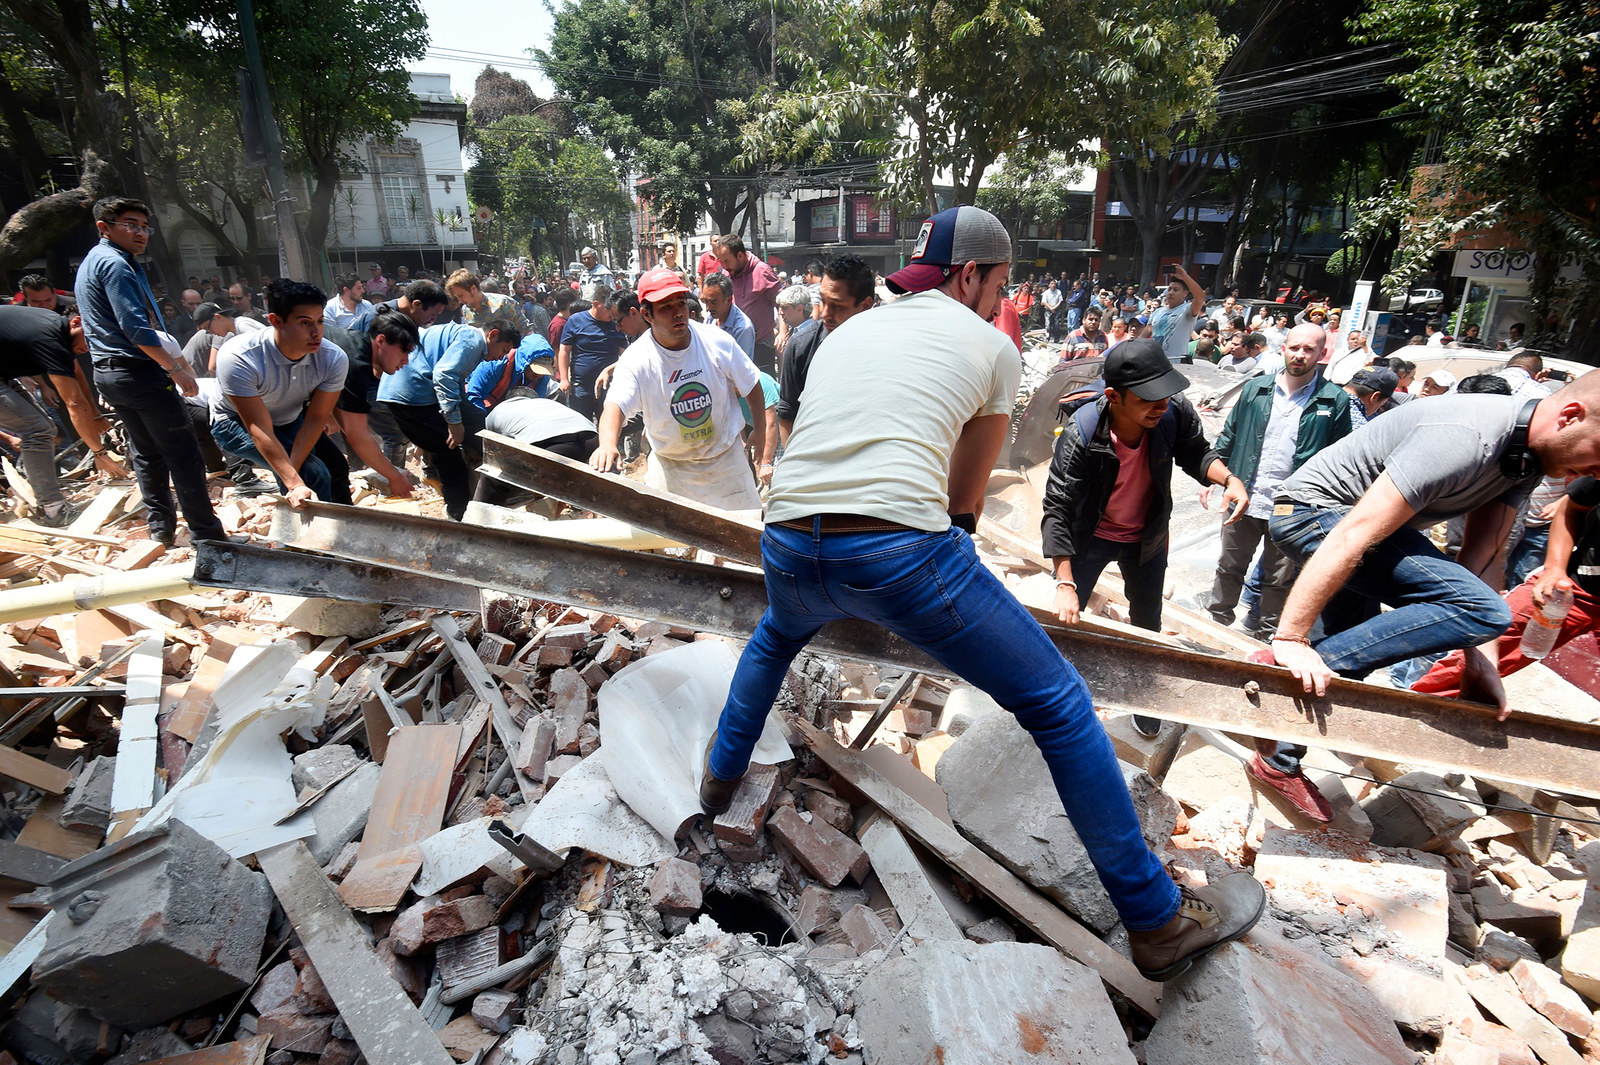 19 Horrifying Photos From The Aftermath Of The 7.1 Earthquake In Mexico